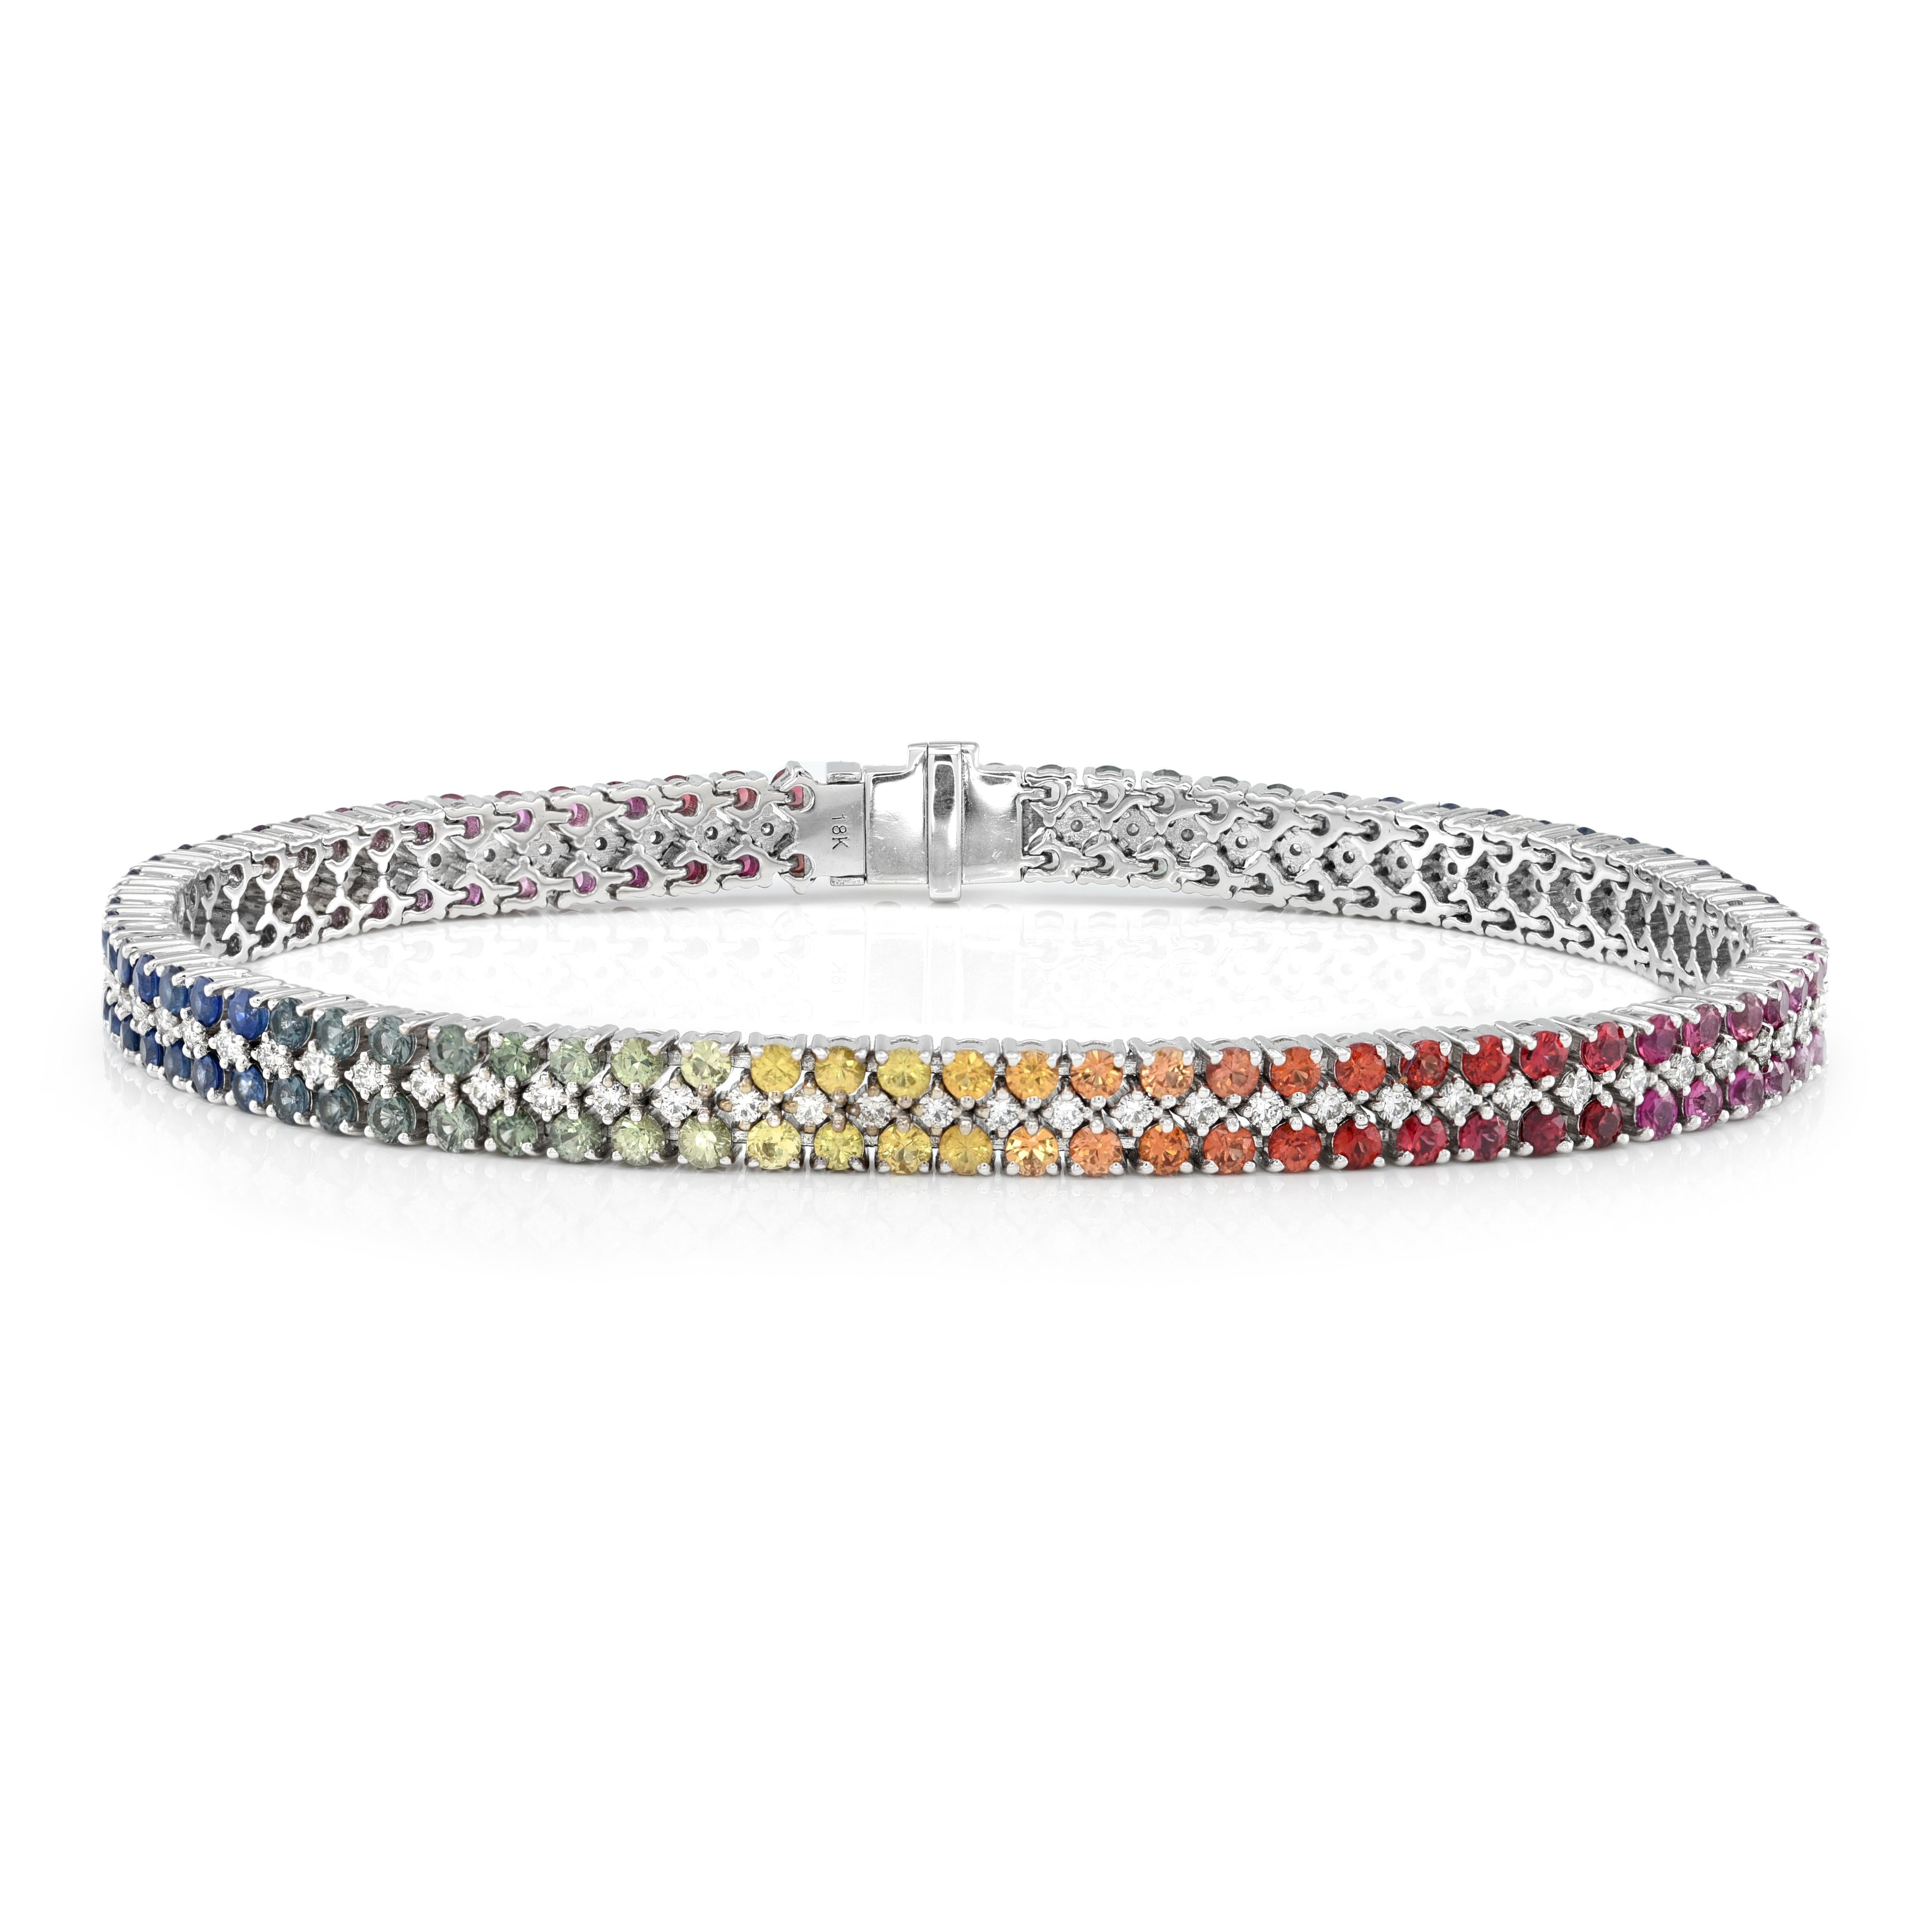 Mixed Cut 5.45 Carats Rainbow Color Sapphires with Diamonds in 18K White Gold Bracelet For Sale